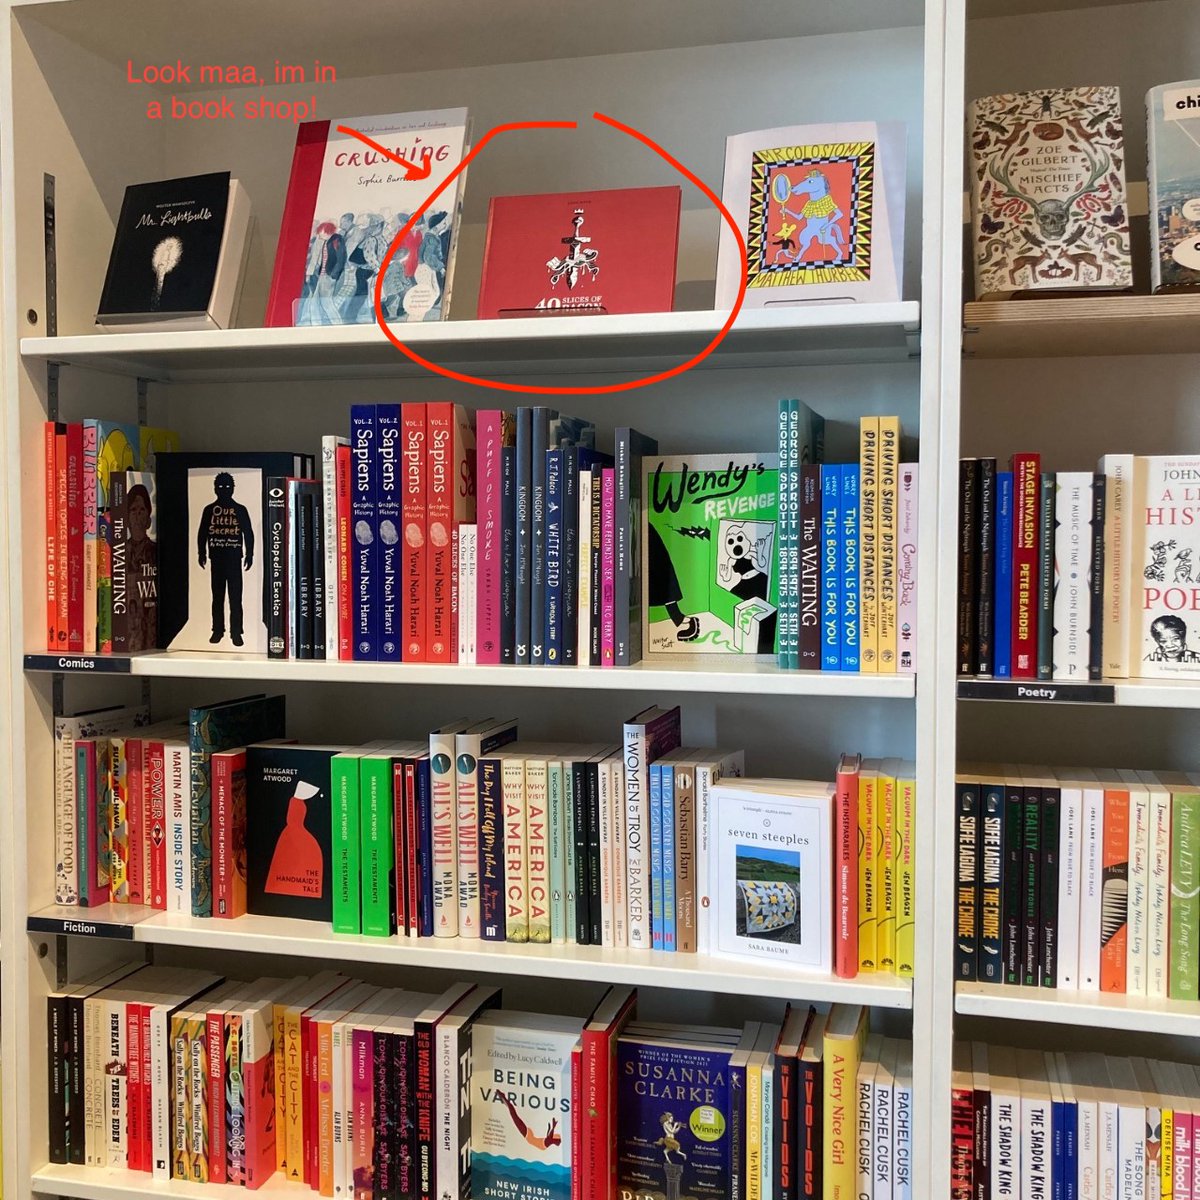 Thanks so much @ArnolfiniArts for stocking my book! No I didn't just walk in and put it there myself.